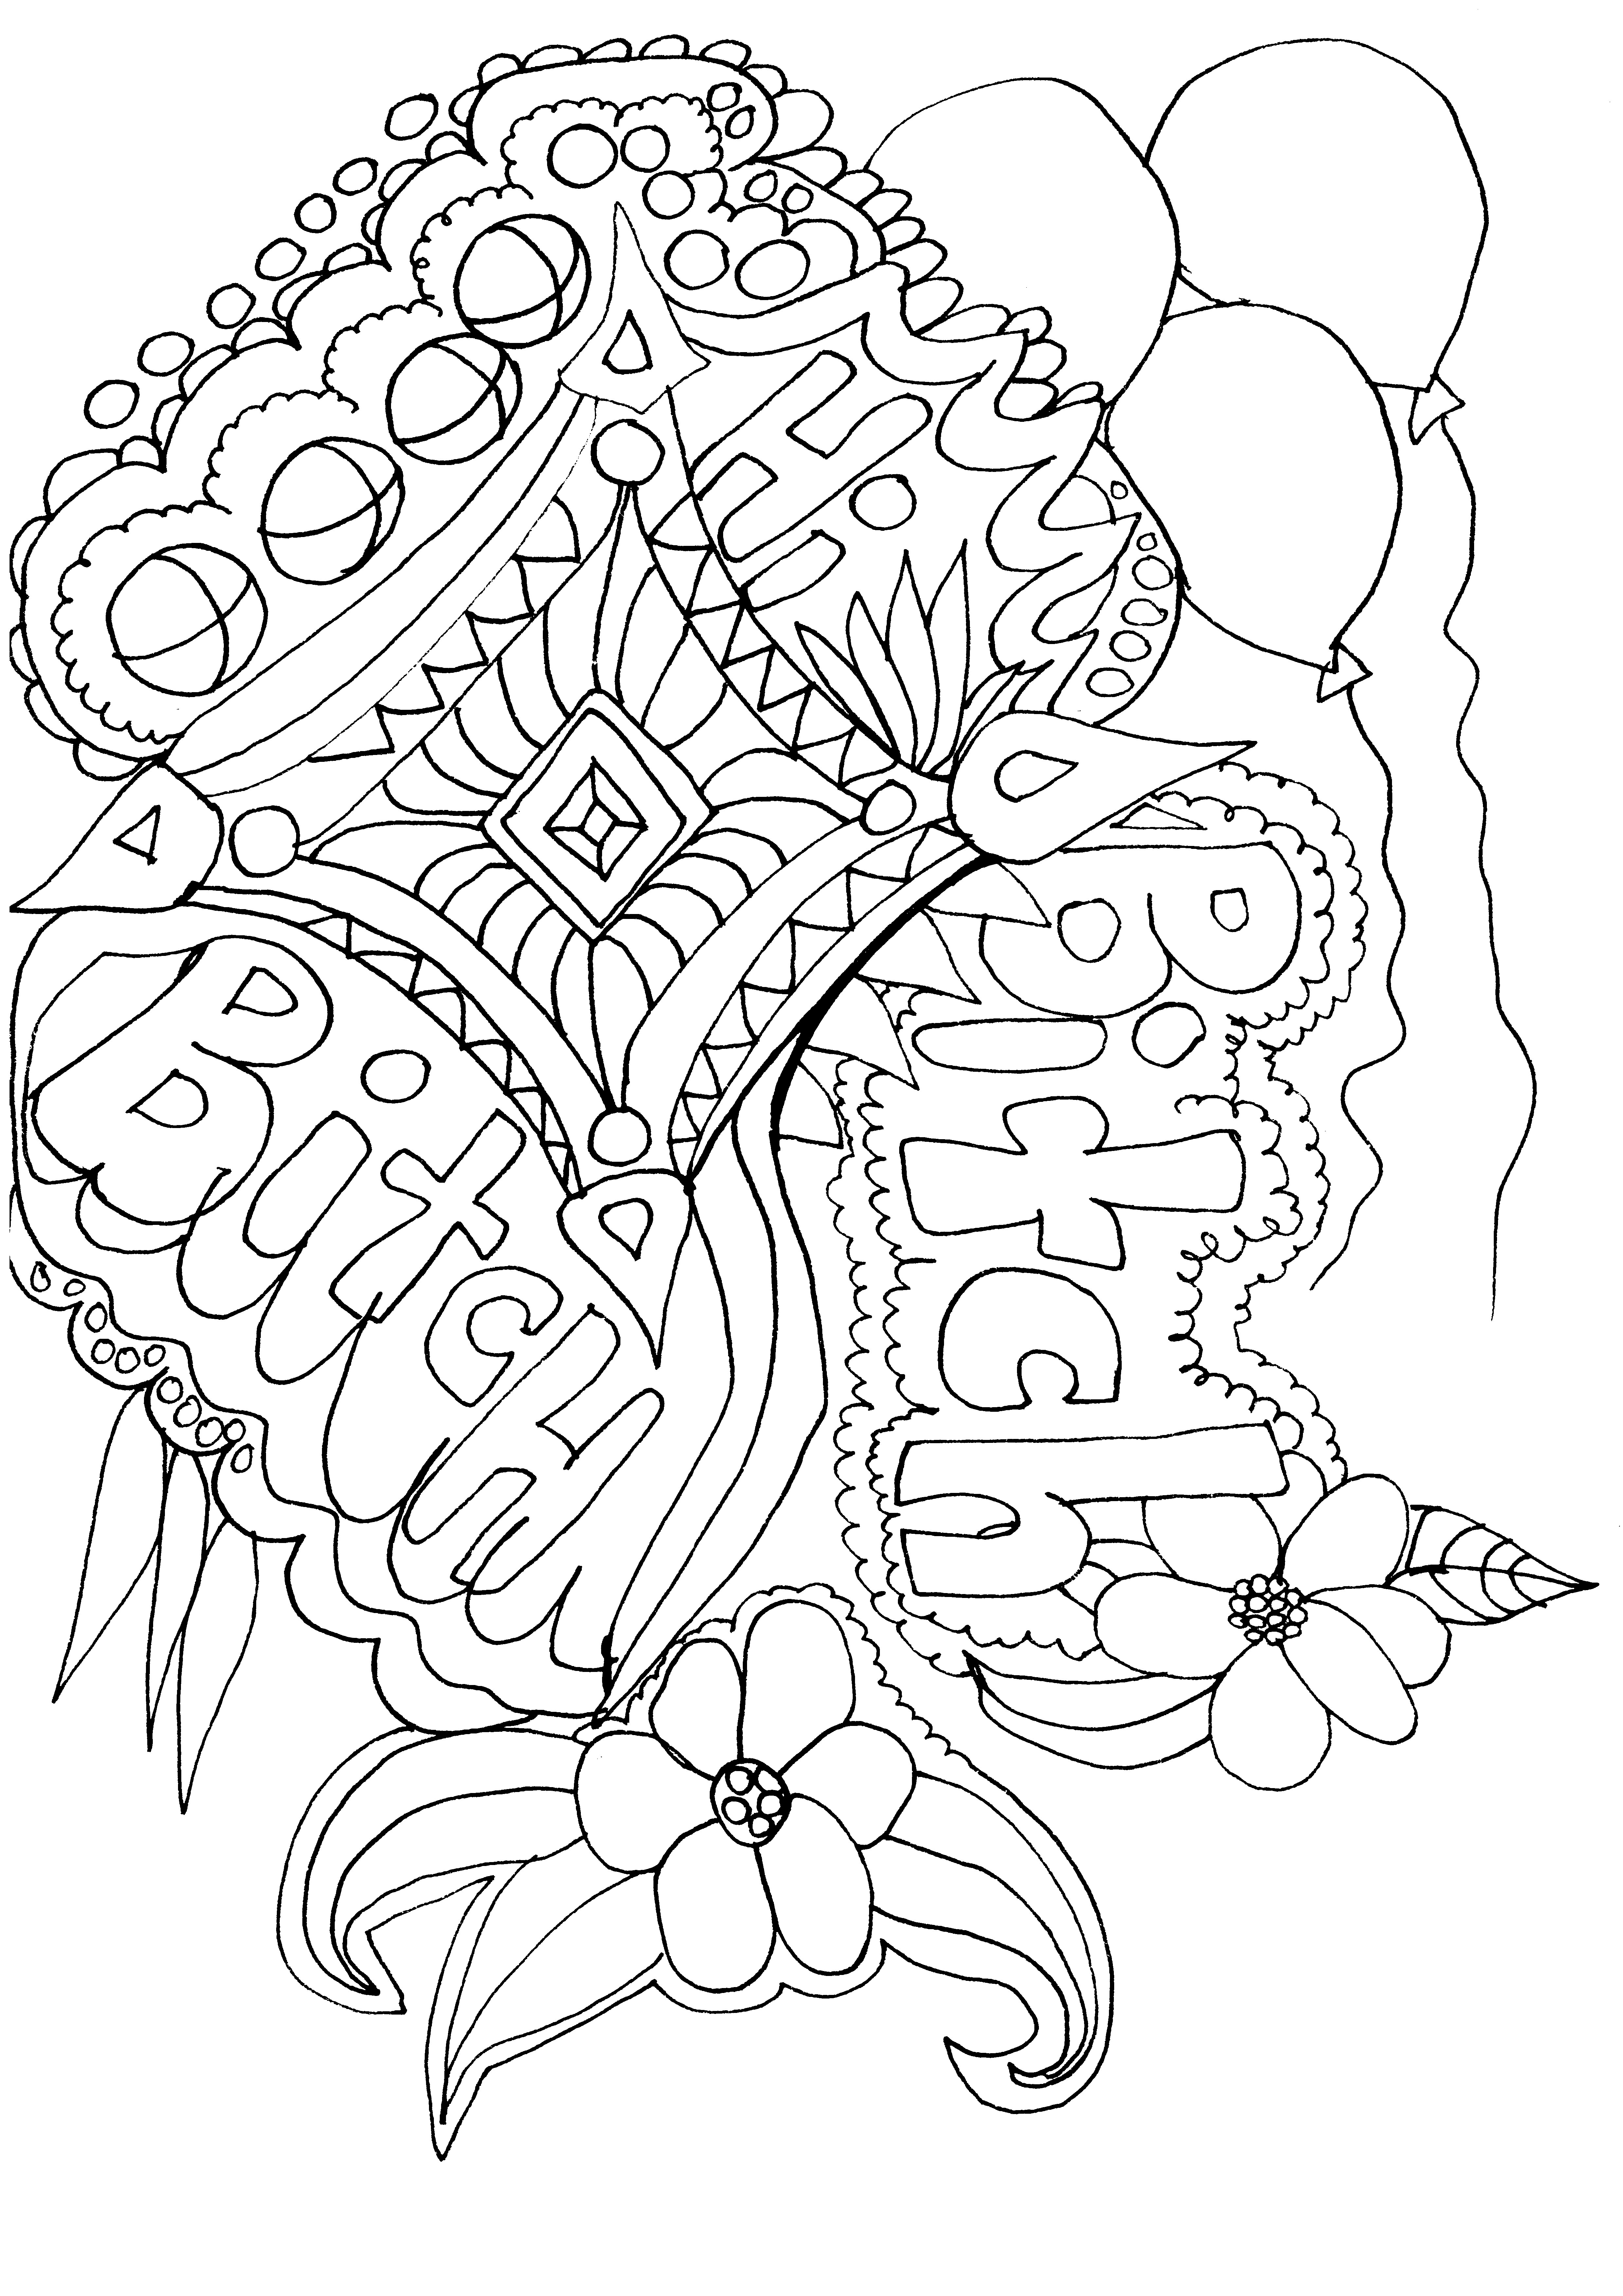 coloring : Word Coloring Pages Elegant Aesthetic Words Coloring Pages Word Coloring  Pages ~ queens